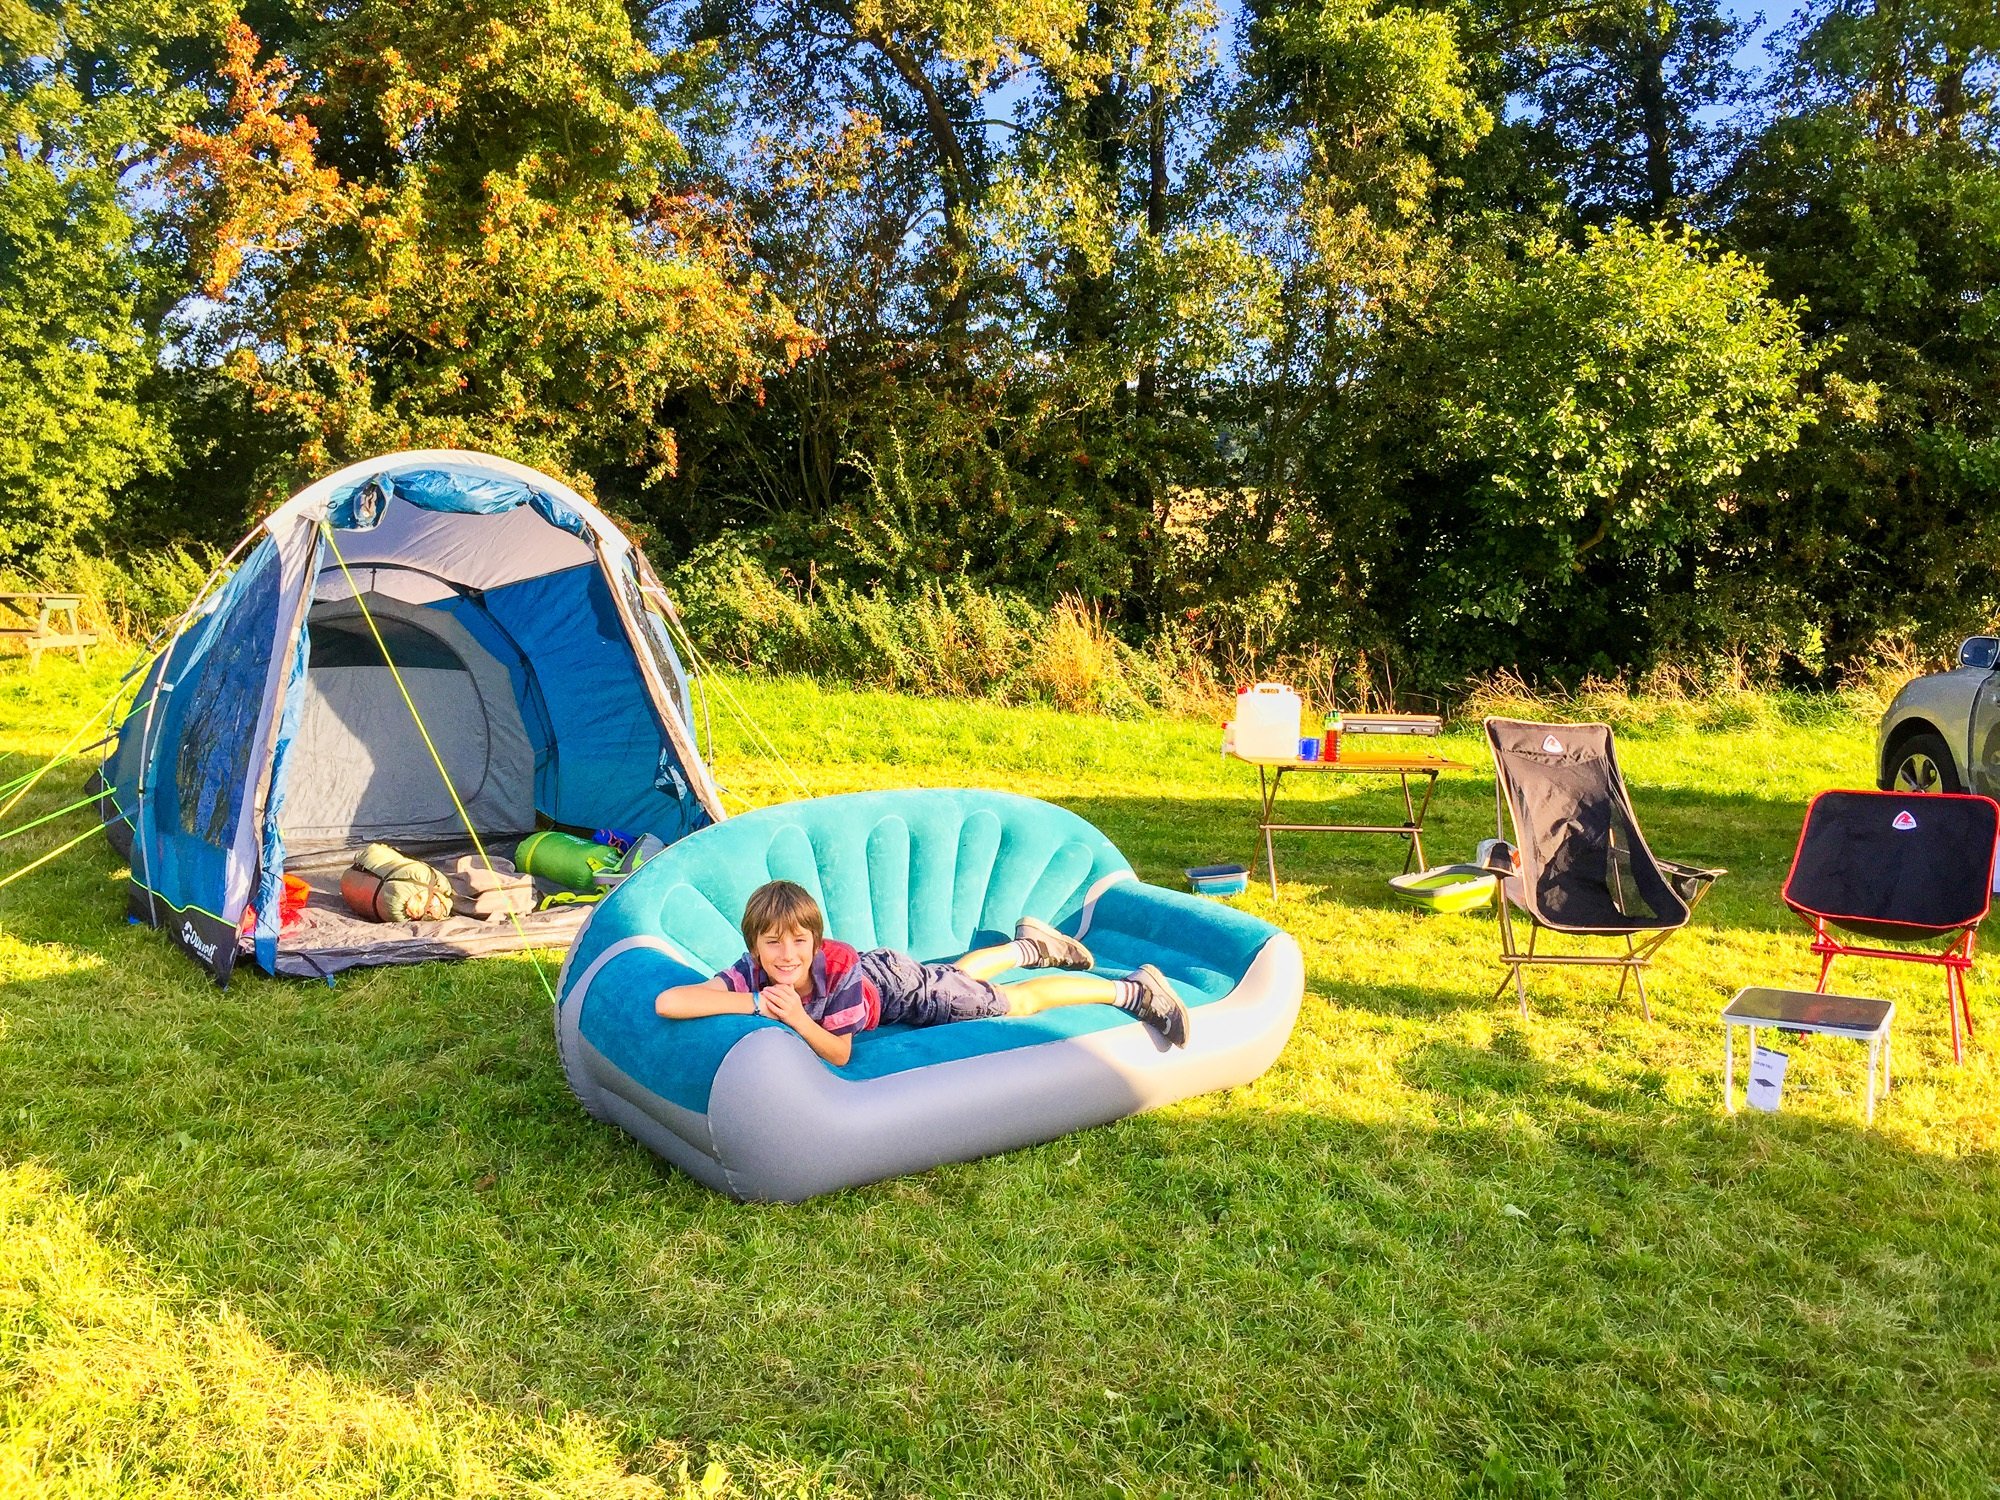 Outwell Vigor tent and sofa at campsite